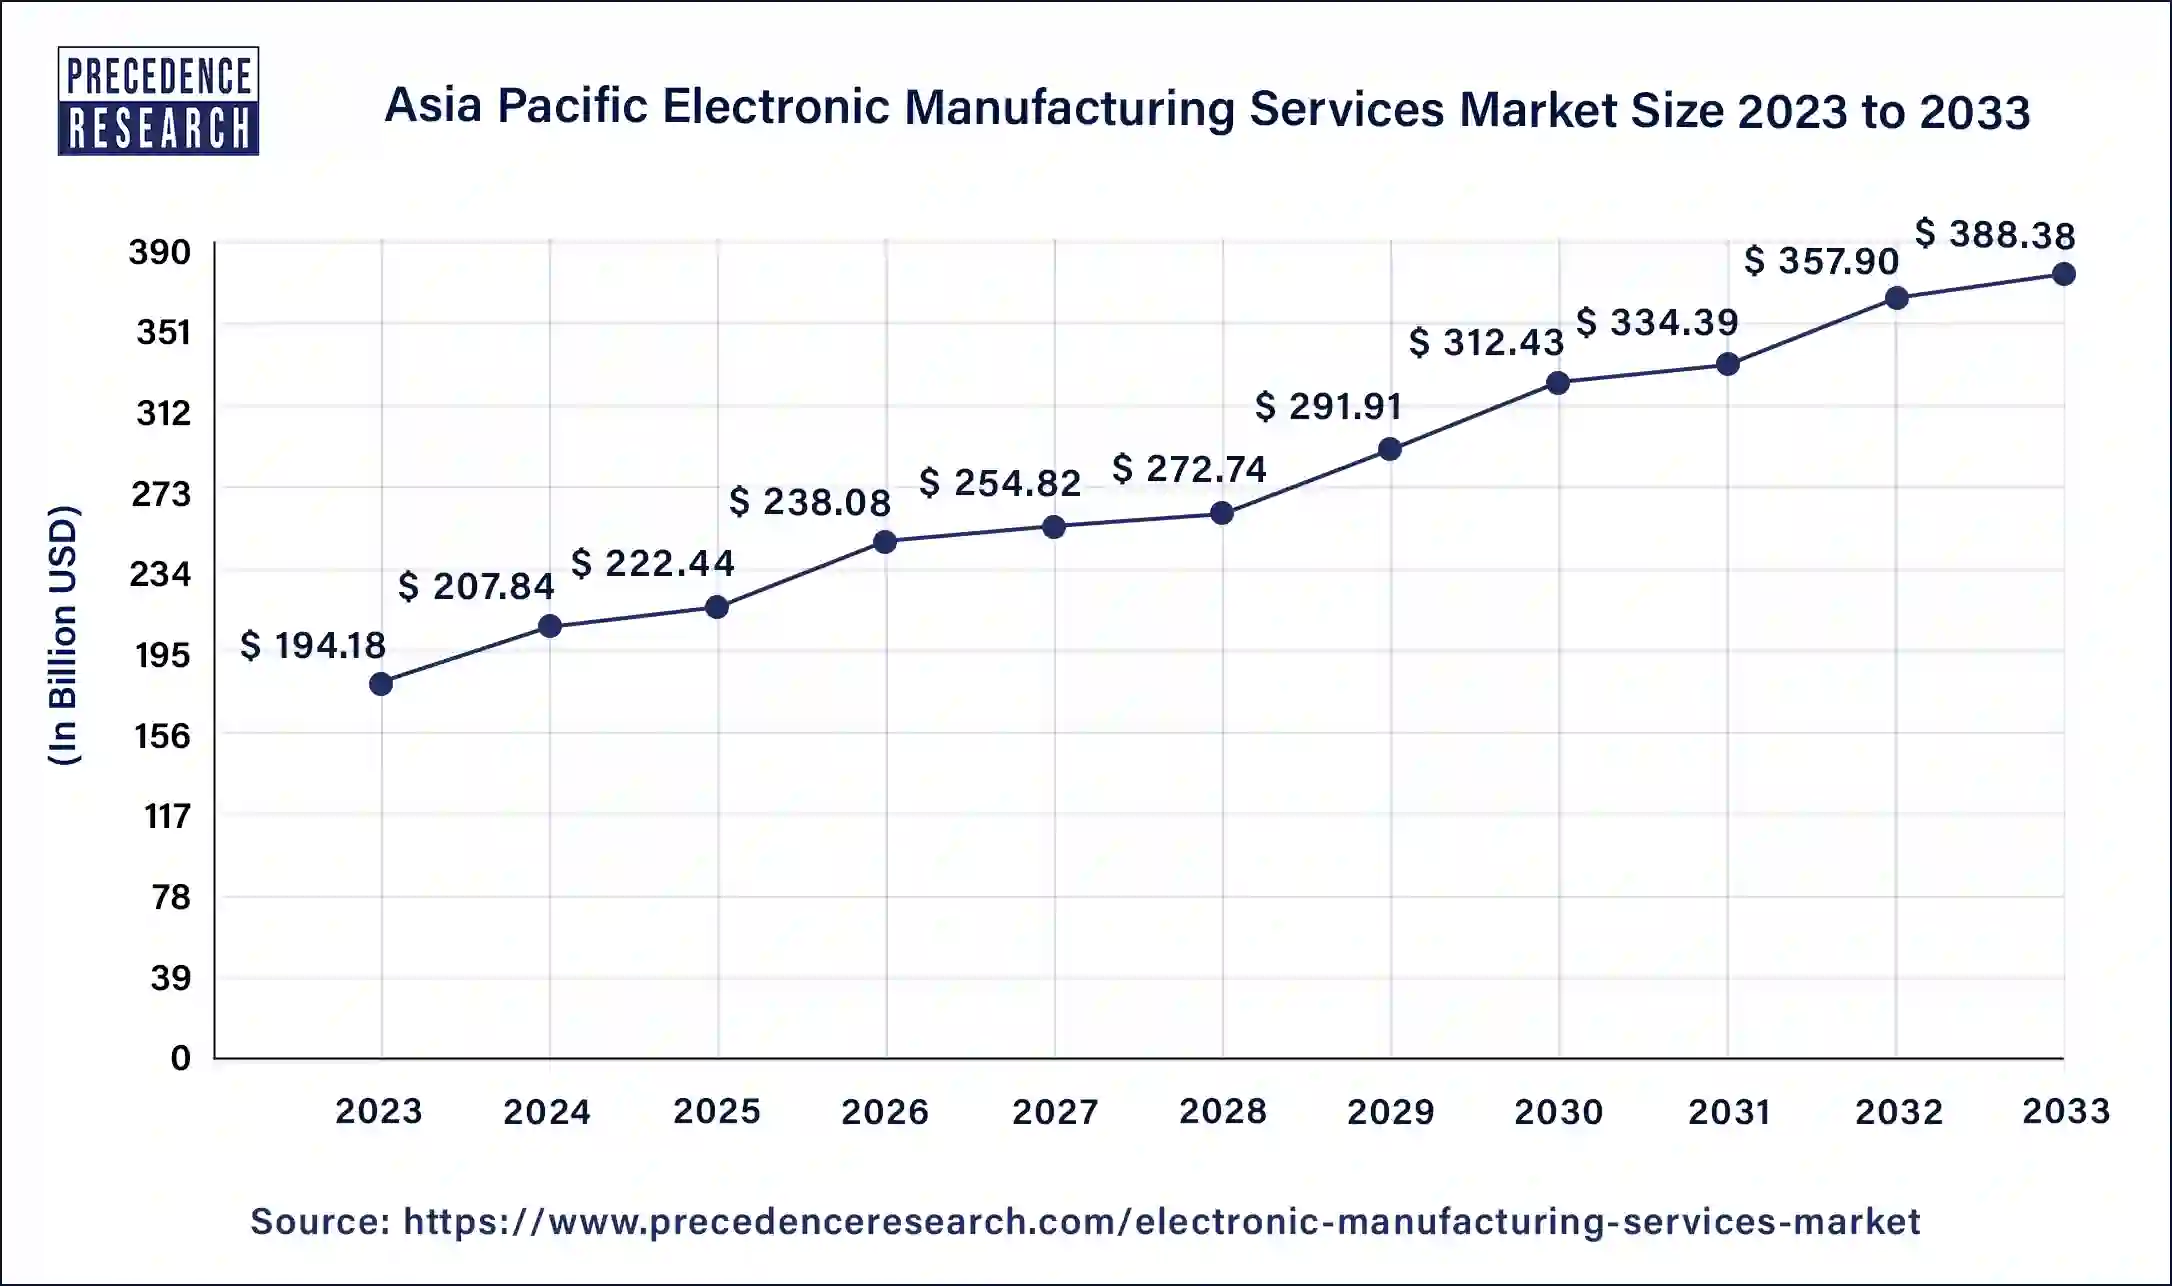 Asia Pacific Electronic Manufacturing Services Market Size 2024 to 2033